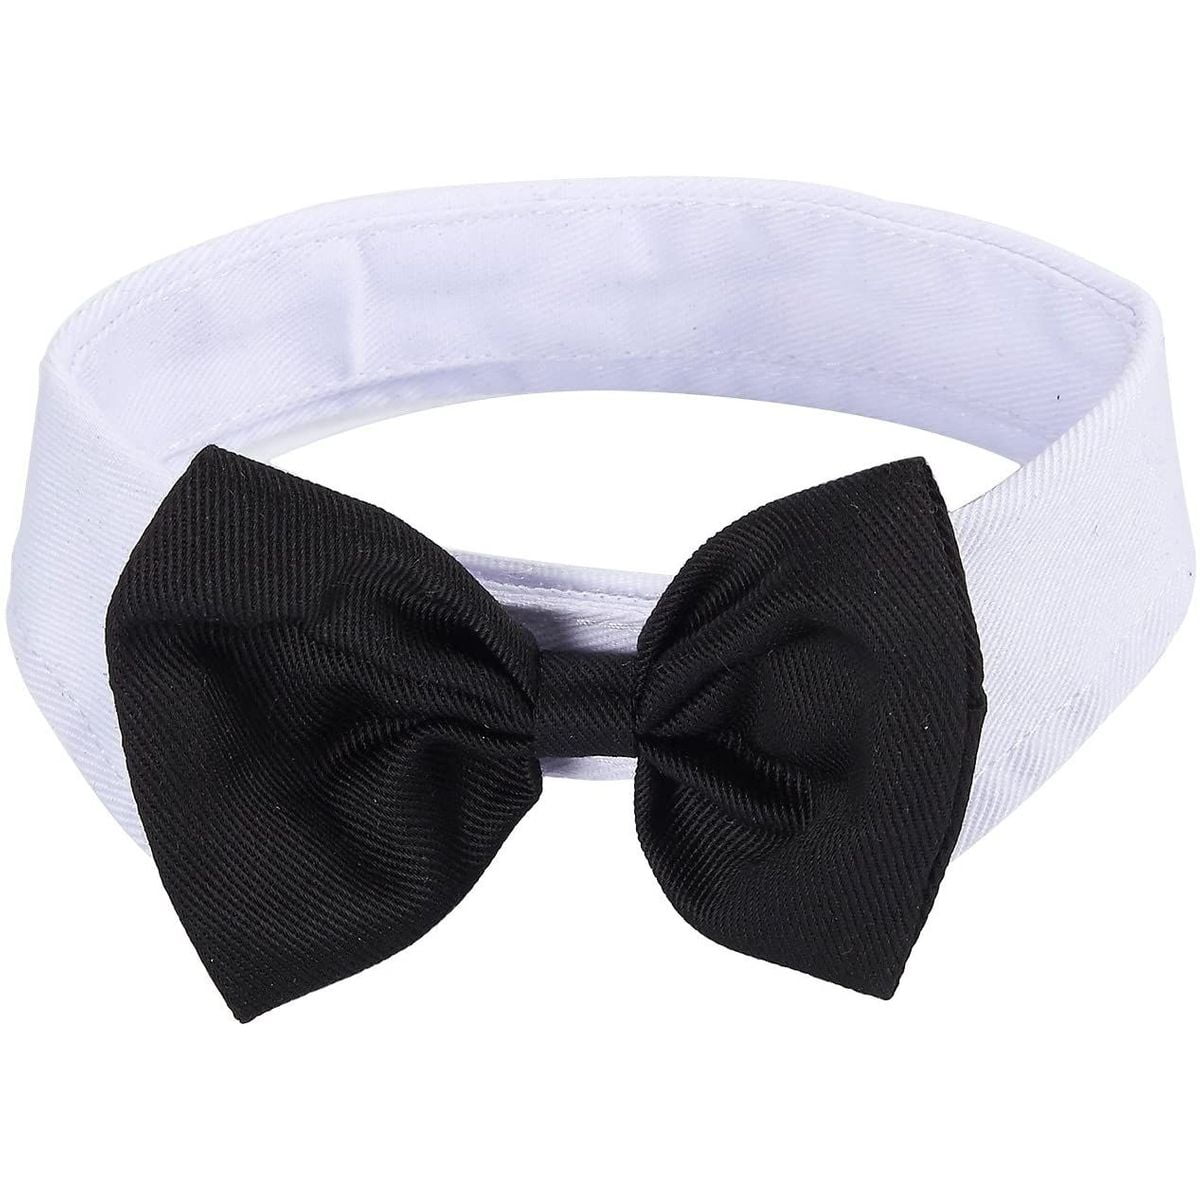 Grey Leaf Dog Bow tie Cat Accessories Cat Bow Tie Dog Accessories Slips on your pet's collar!